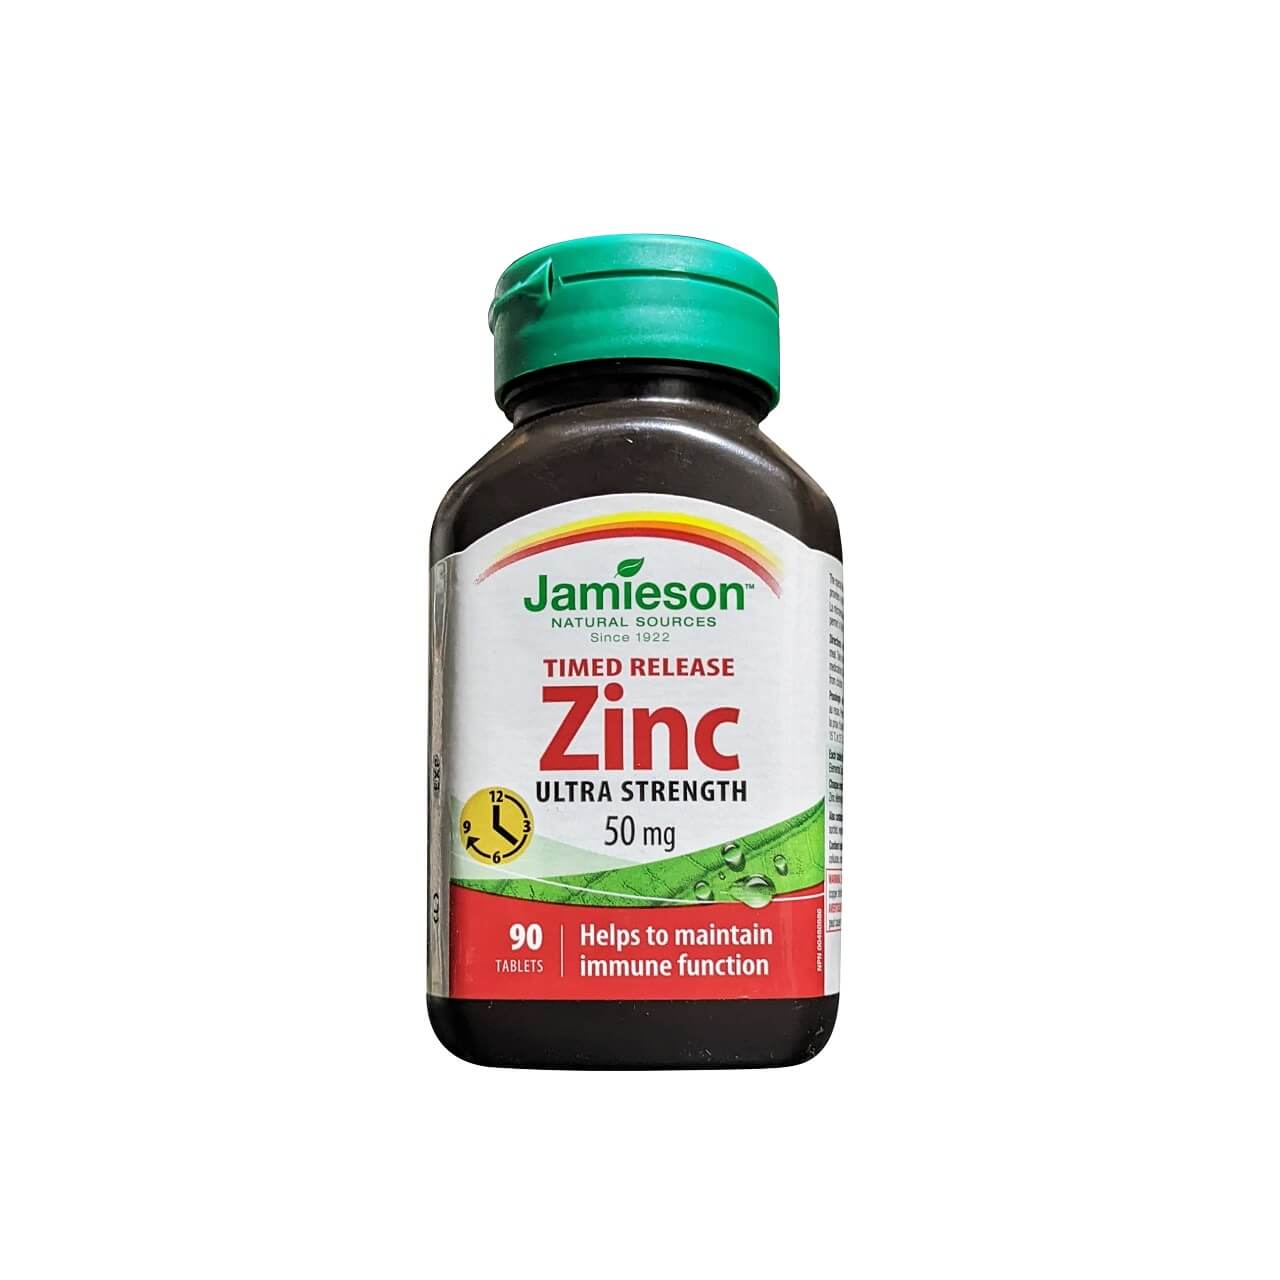 Product label for Jamieson Zinc 50 mg Ultra Strength Timed Release (90 tablets) in English